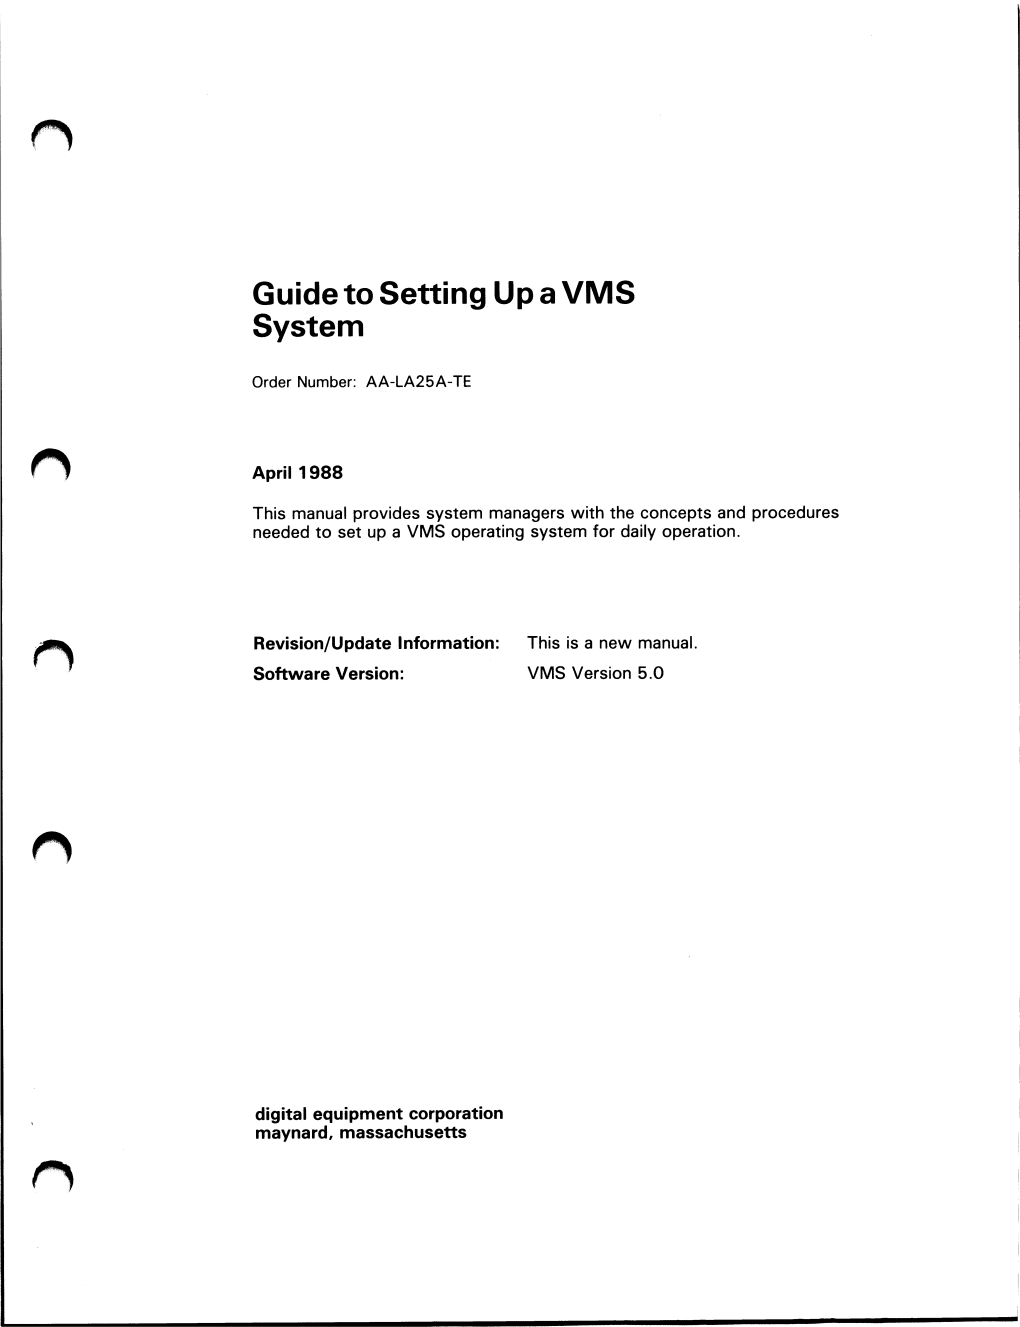 Guide to Setting up a VMS System